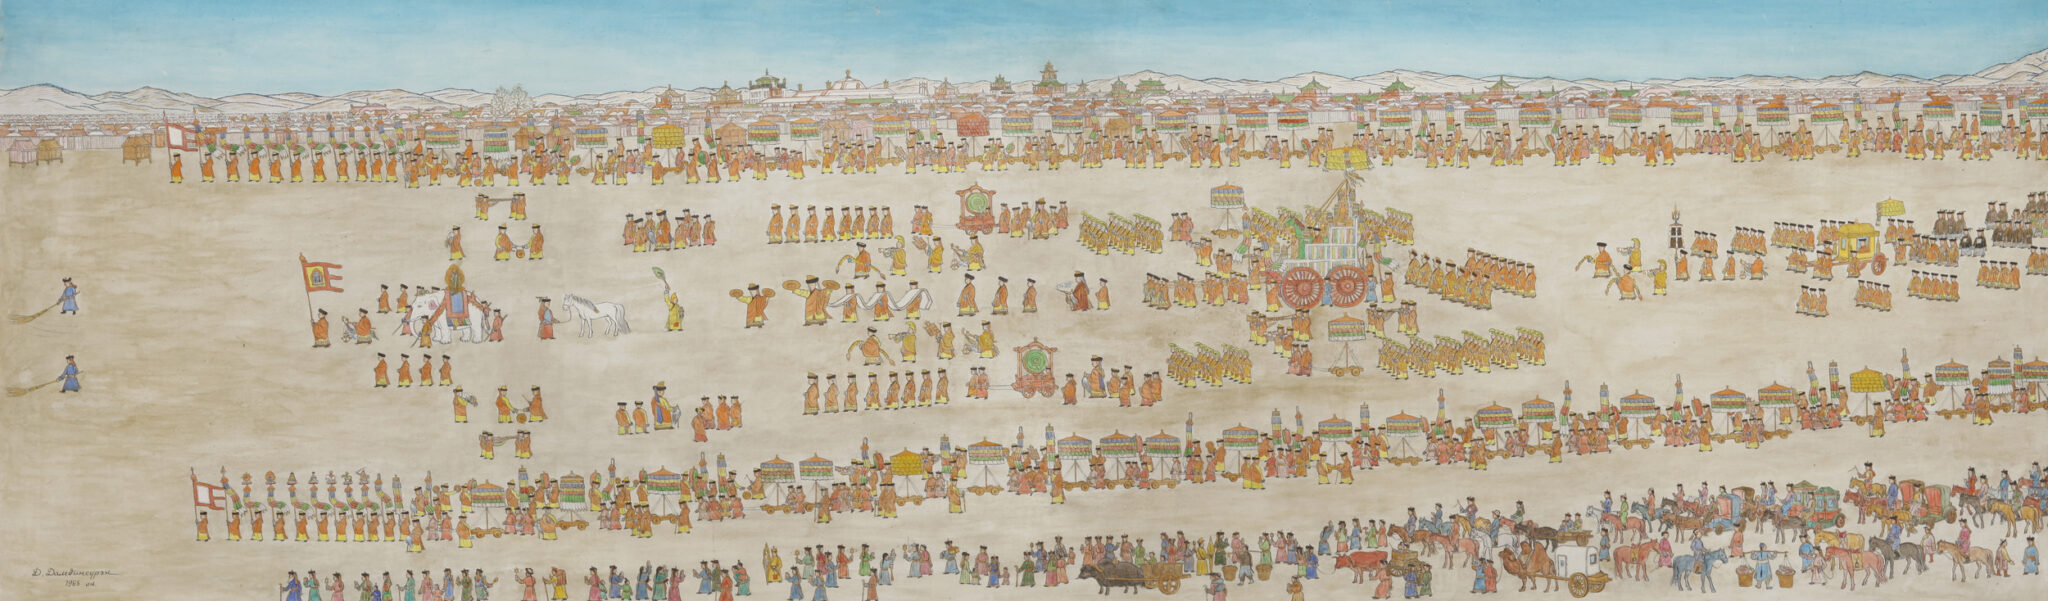 Panoramic painting depicting hundreds of figures arranged in formation on dusty field under blue sky